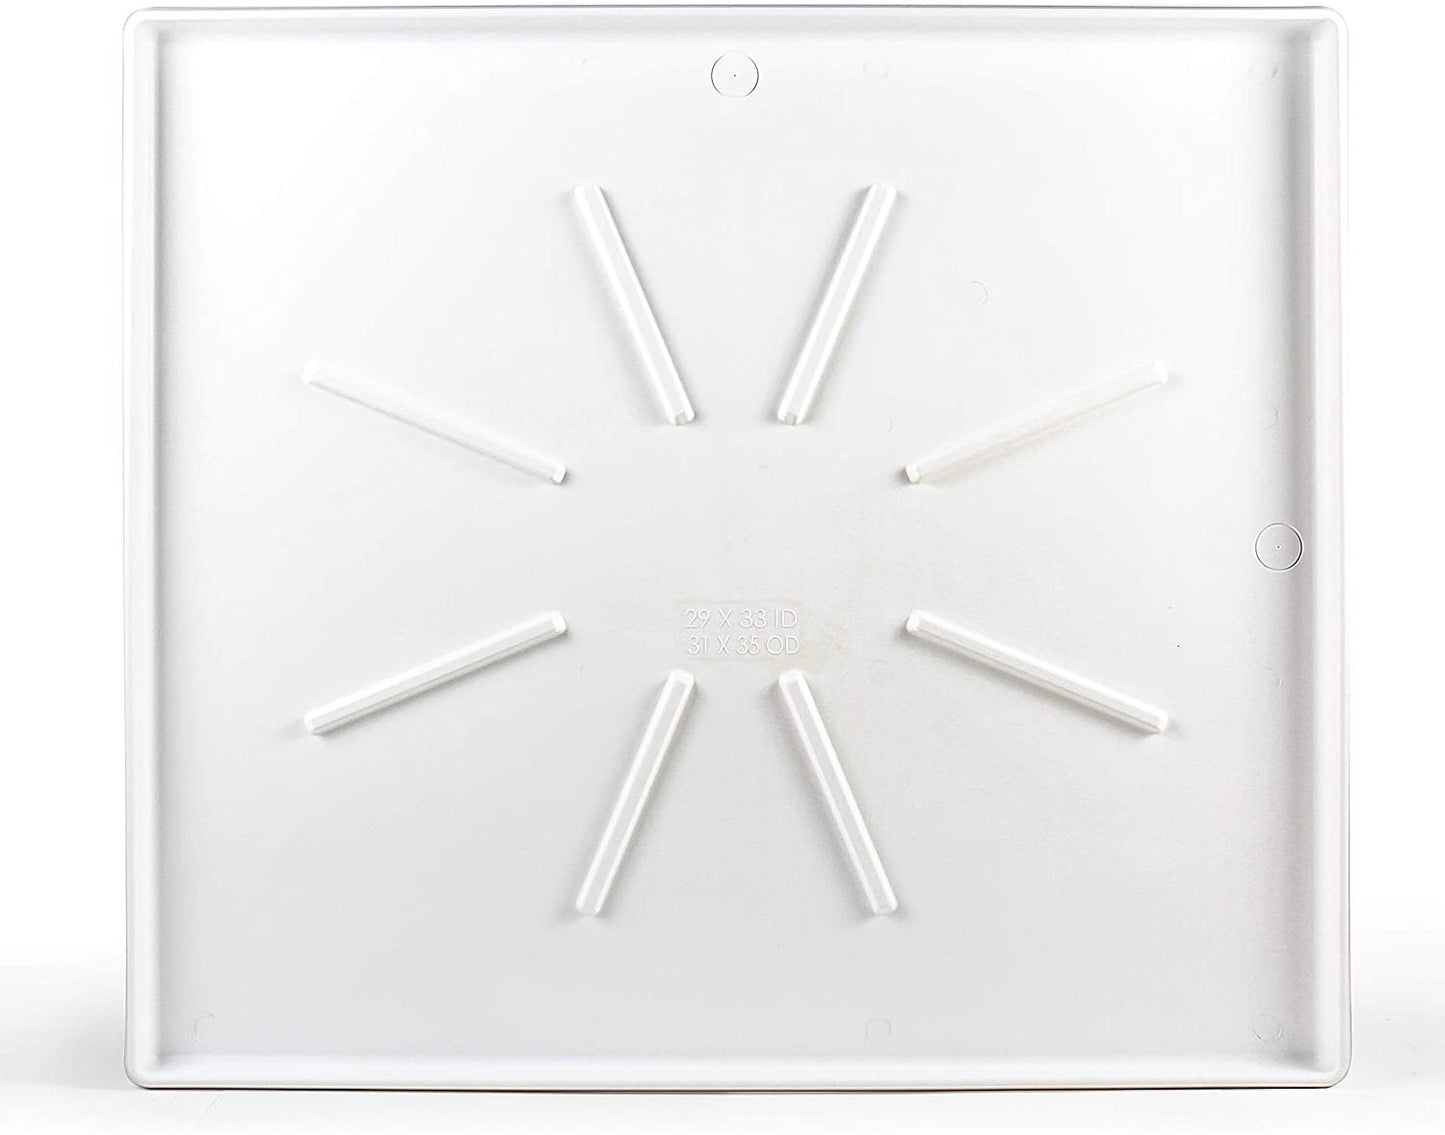 Front-Load Washing Machine Drain Pan, Protects Your Floor from Washing Machine Leaks, OD 30.5" x 34.5" x 1.64" (20786), White